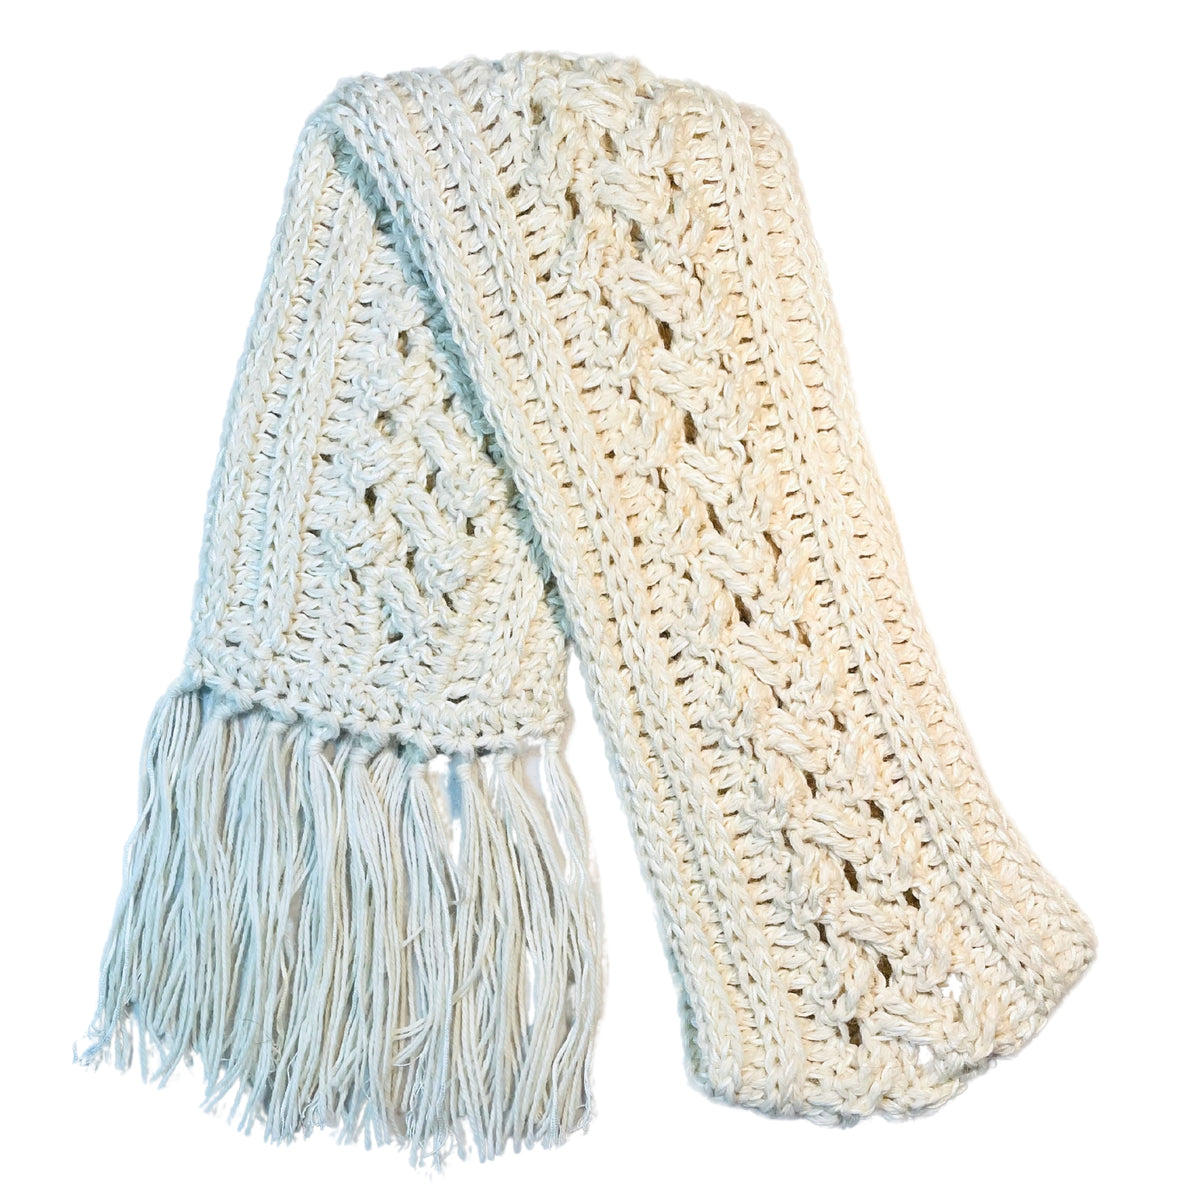 Cozy soft warm alpaca and bamboo scarf for winter fashion. Handmade knitted crochet scarf made from yarn in the color natural white.